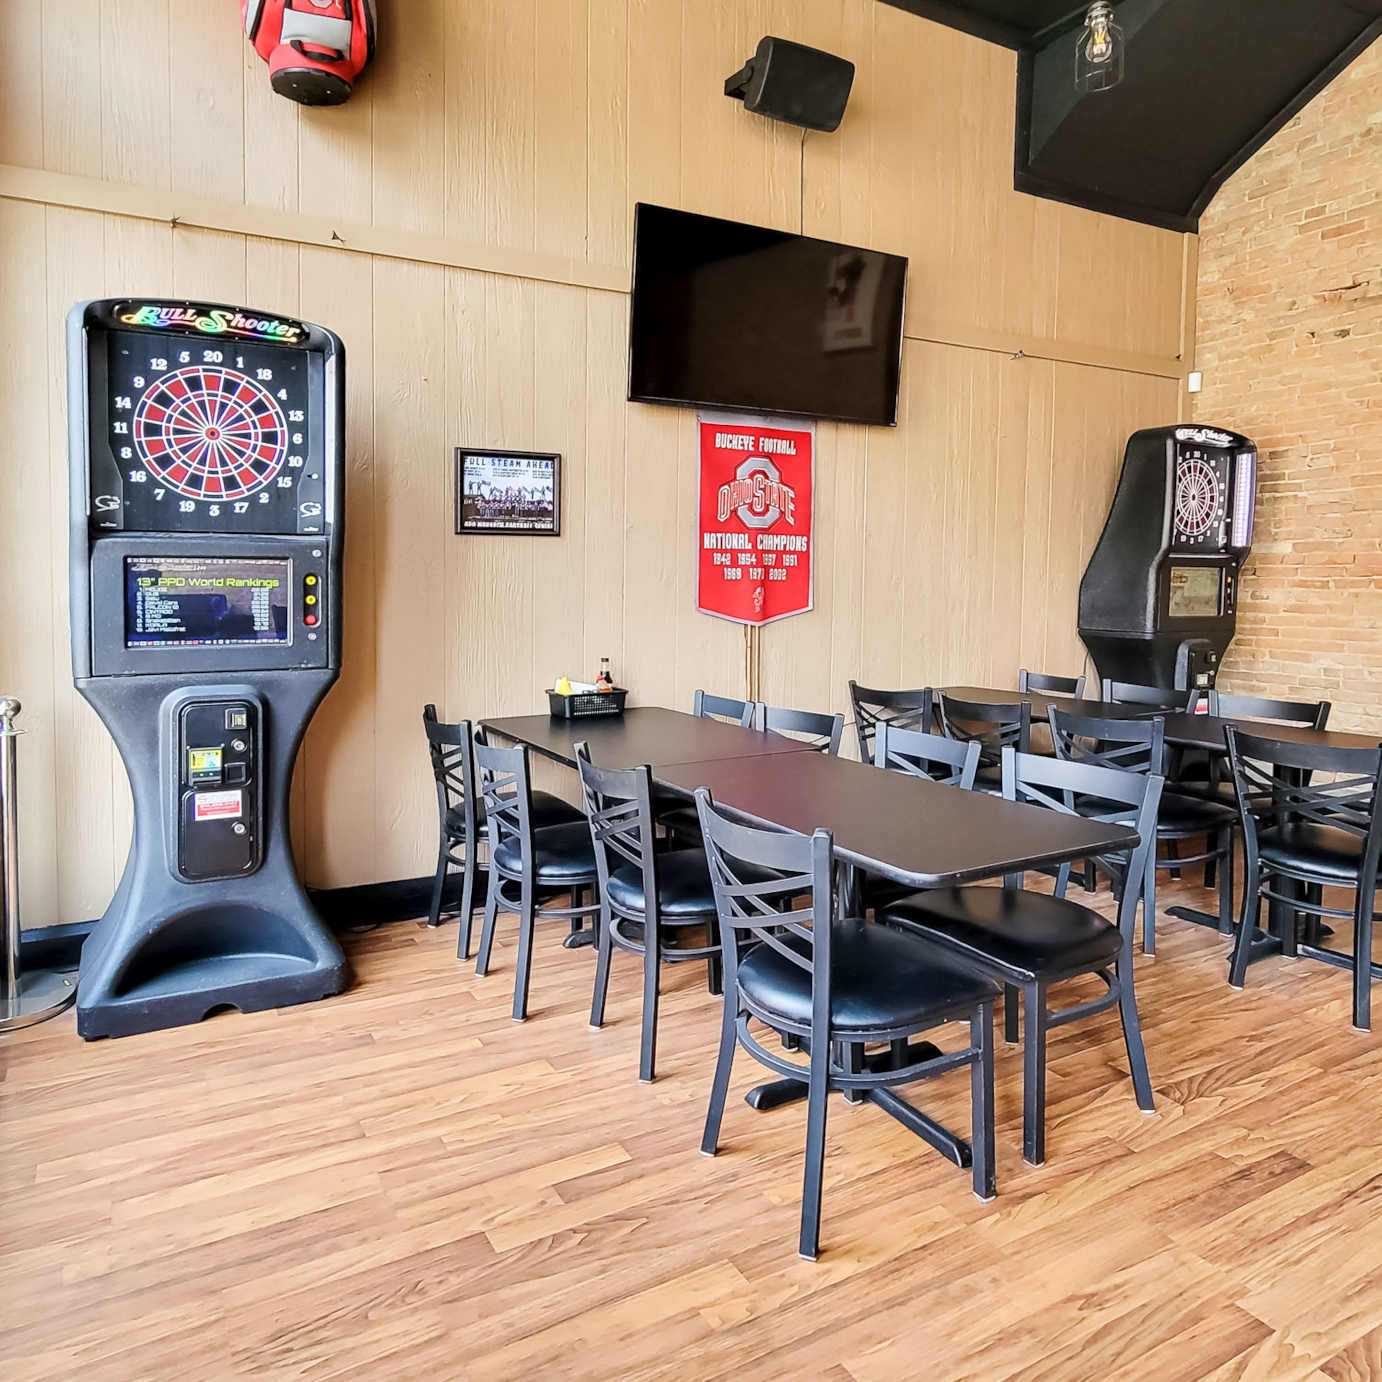 Interior, dining tables and chairs, two dartboard machines, wall TV